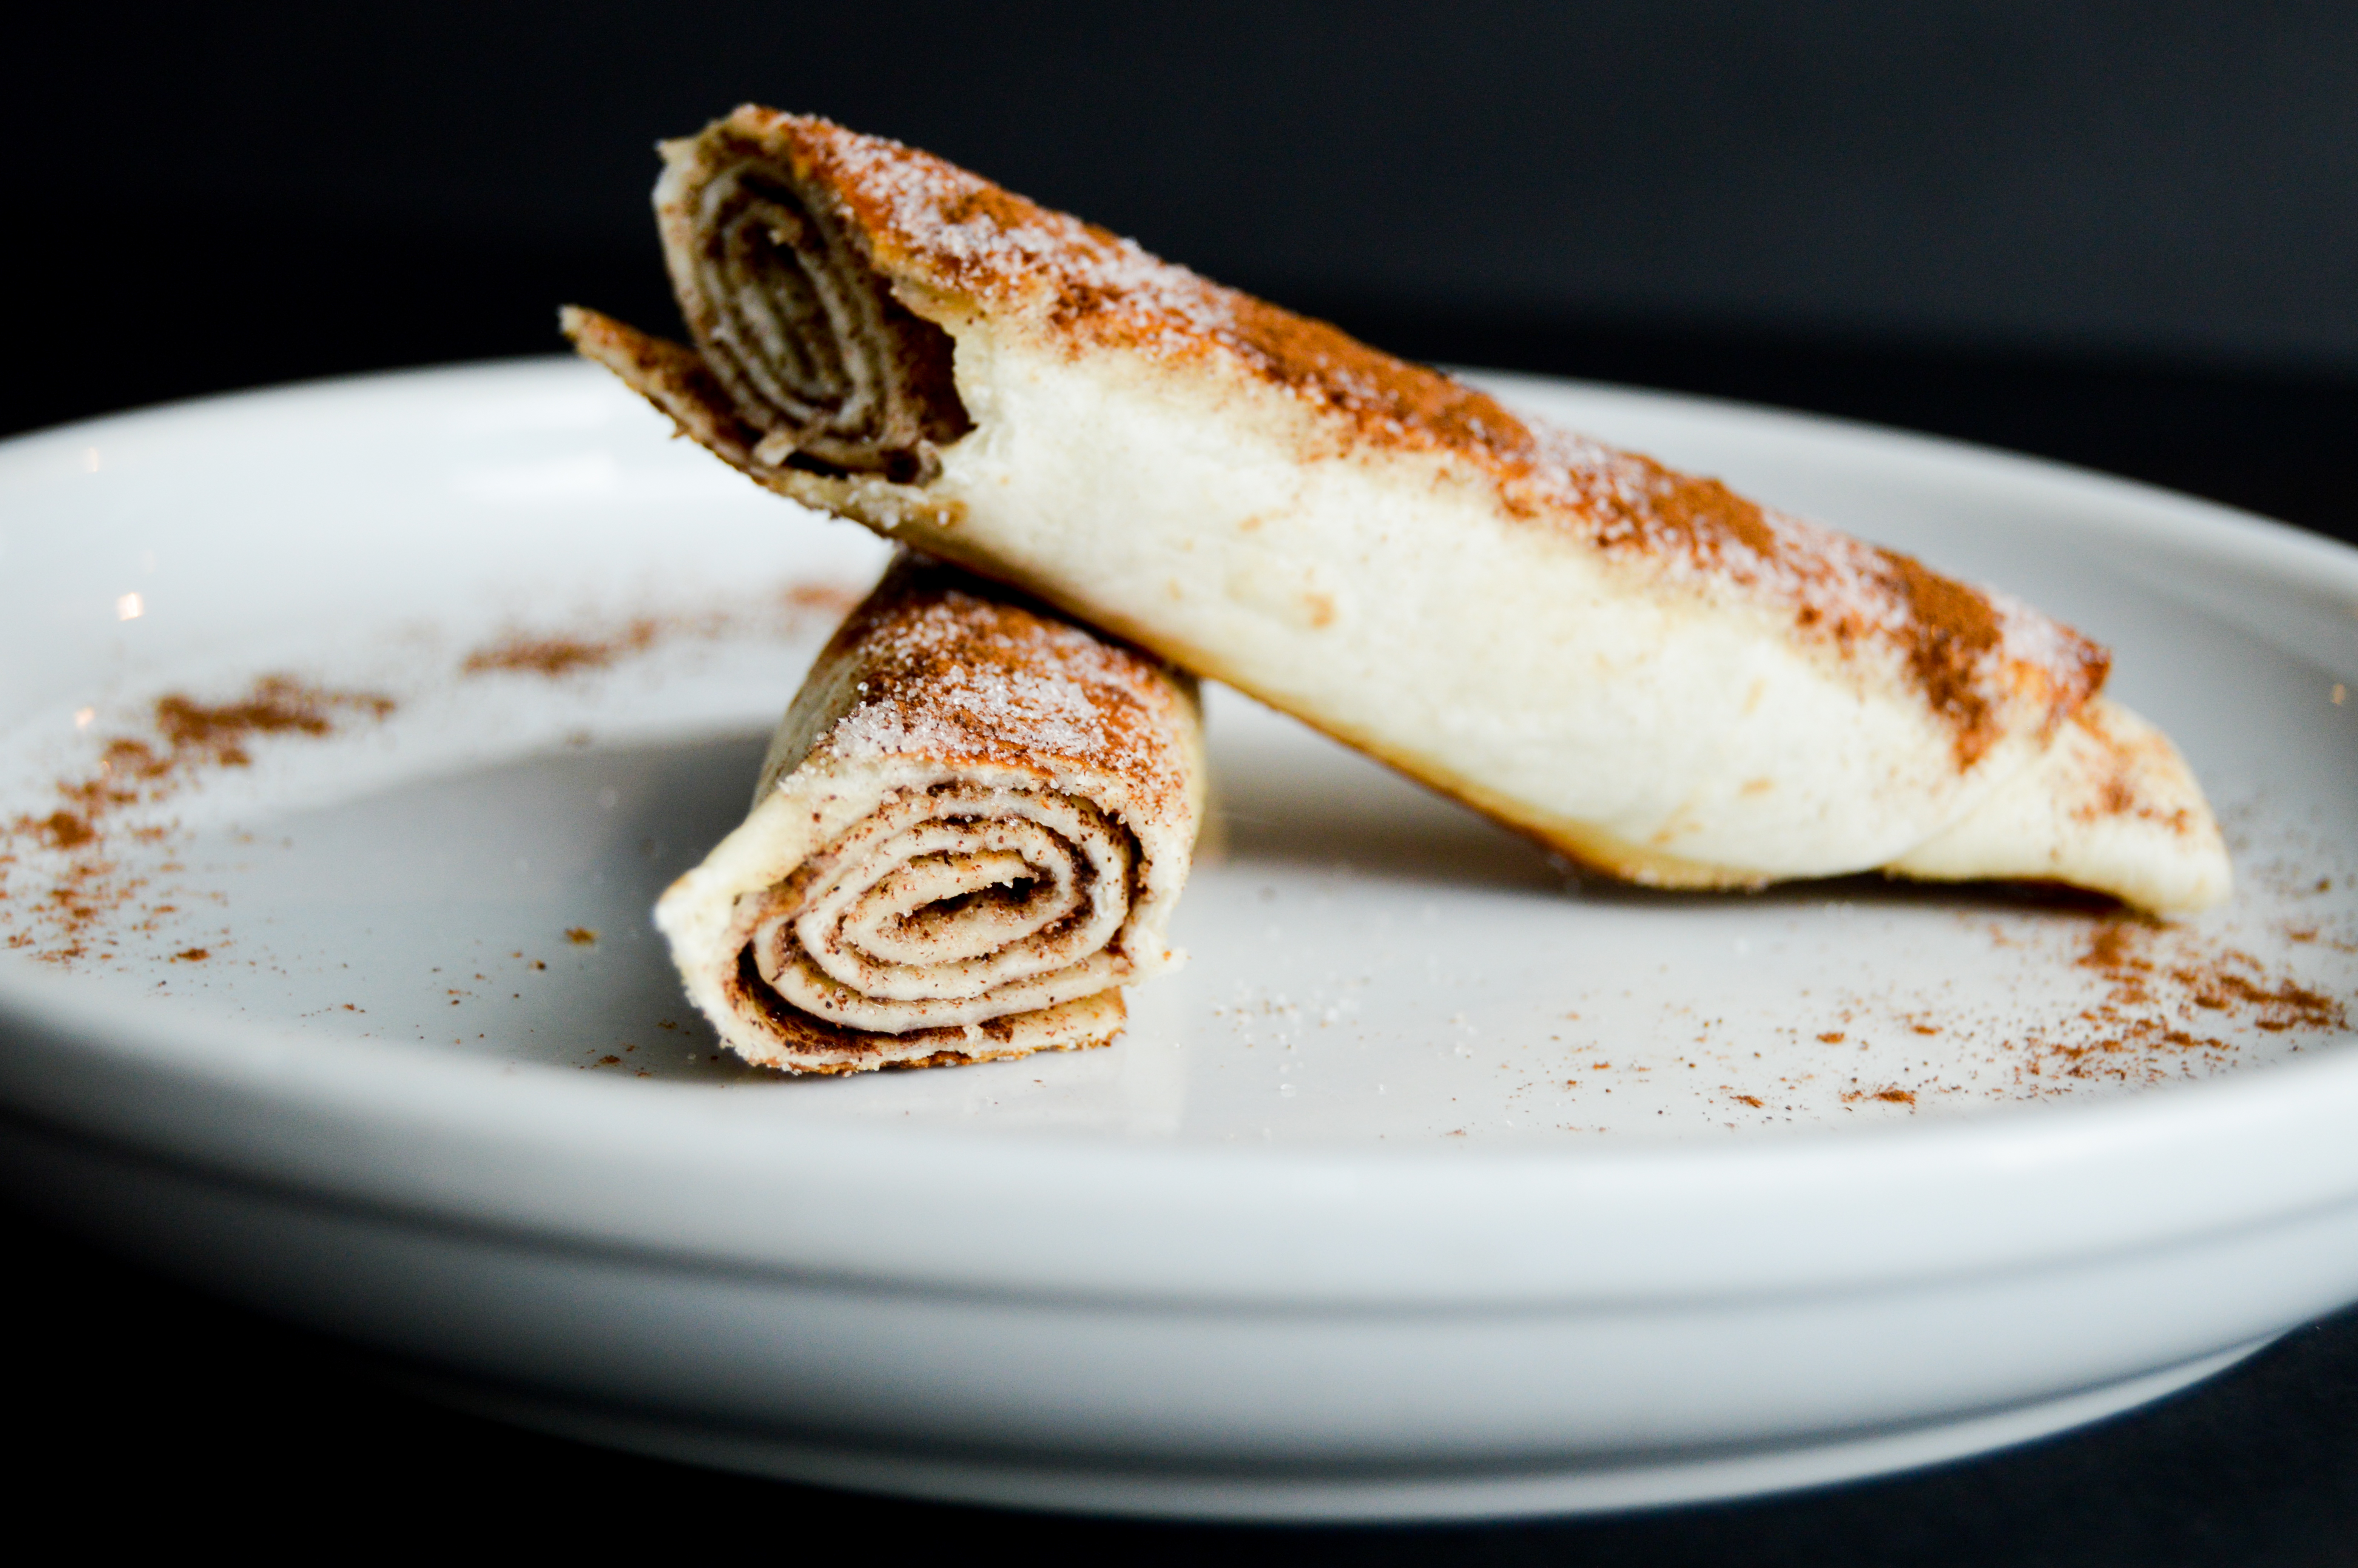 Cinnamon sugar tortilla roll ups recipe inspired by churros. These easy churro pinwheels make a tasty snack, appetizer, or treat for Cinco de Mayo. Simple 4 ingredient recipe that the kids will love! 